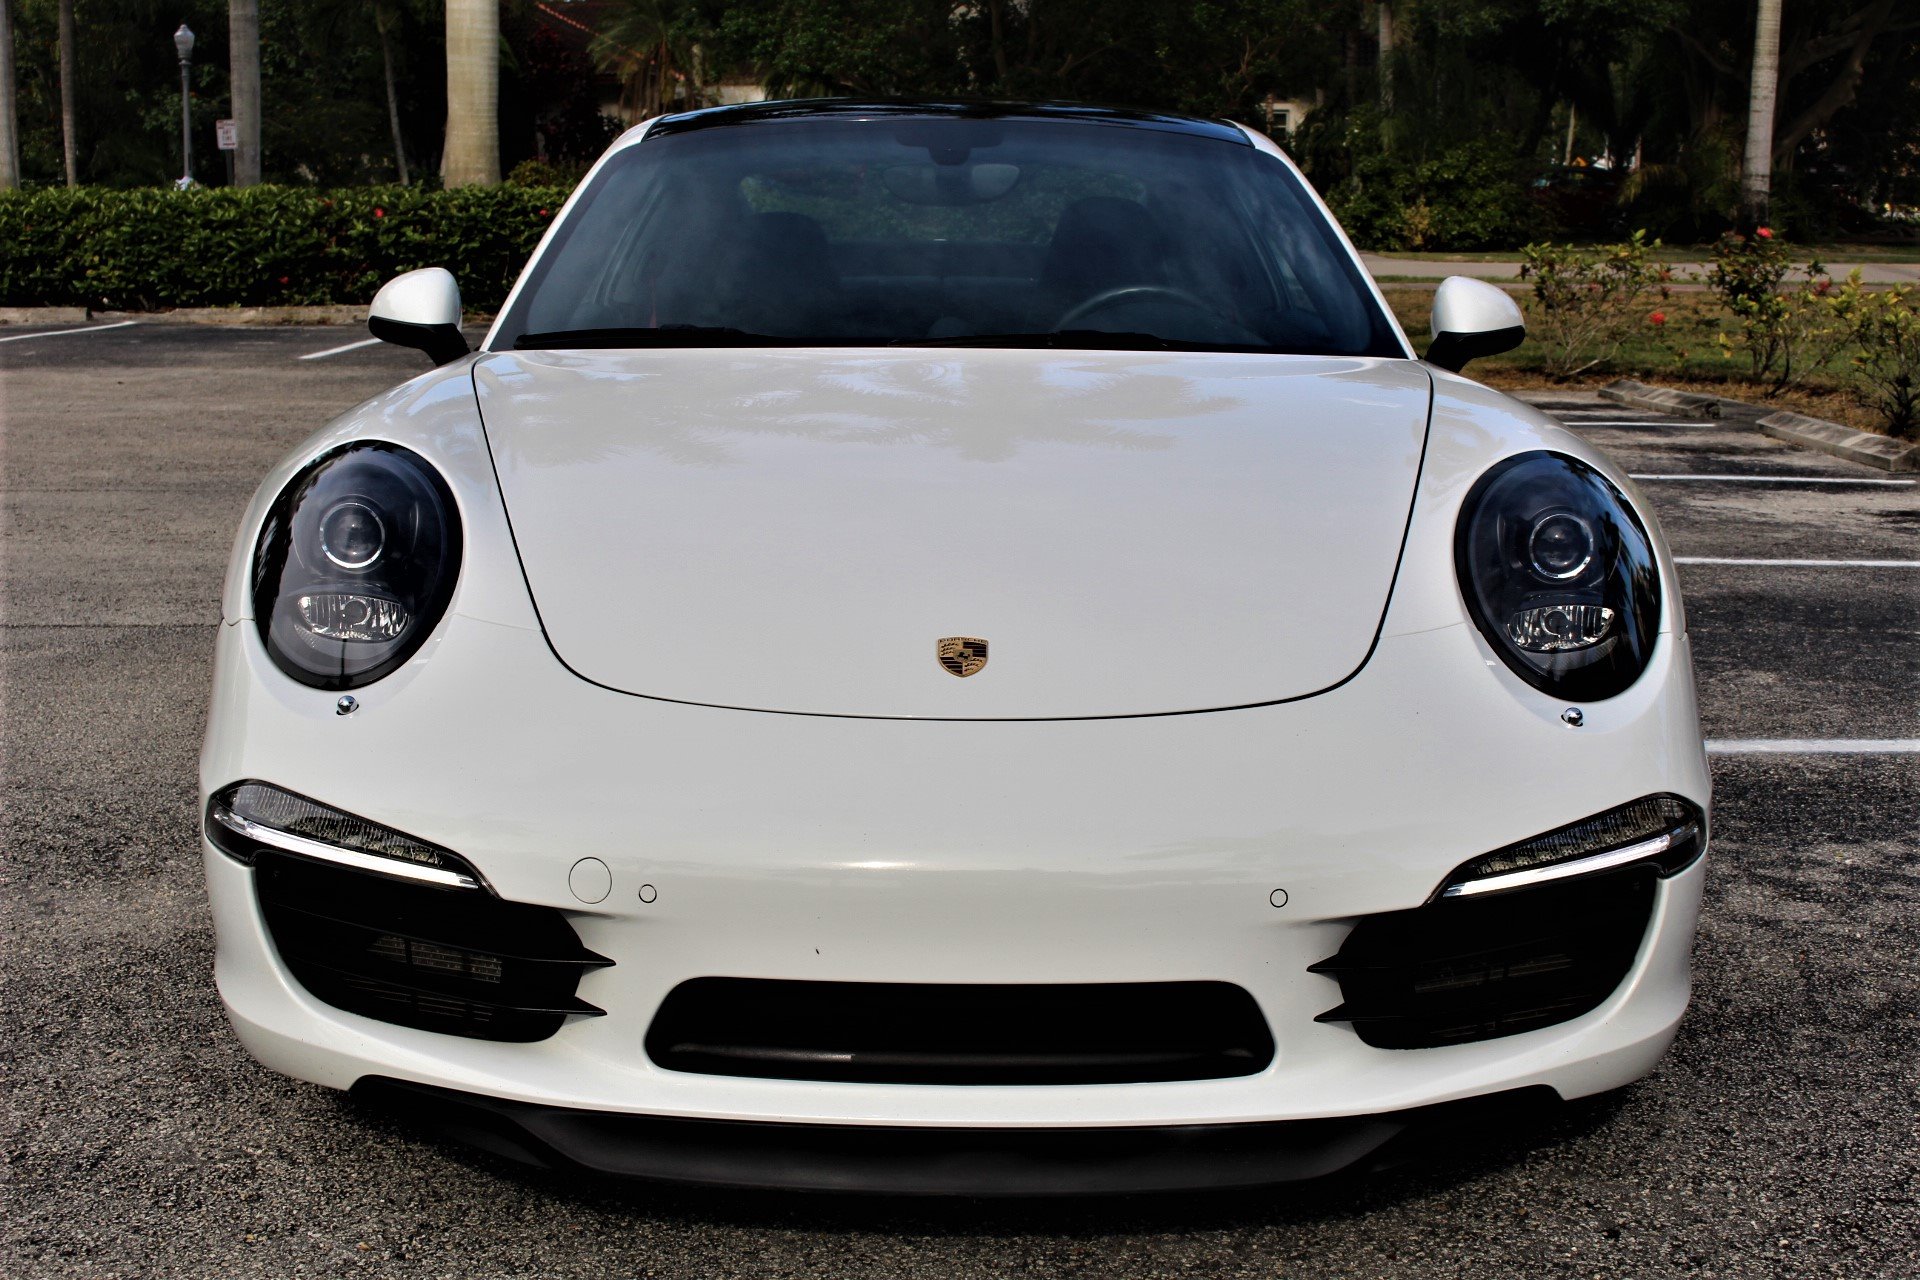 Used 2014 Porsche 911 Carrera S for sale Sold at The Gables Sports Cars in Miami FL 33146 4